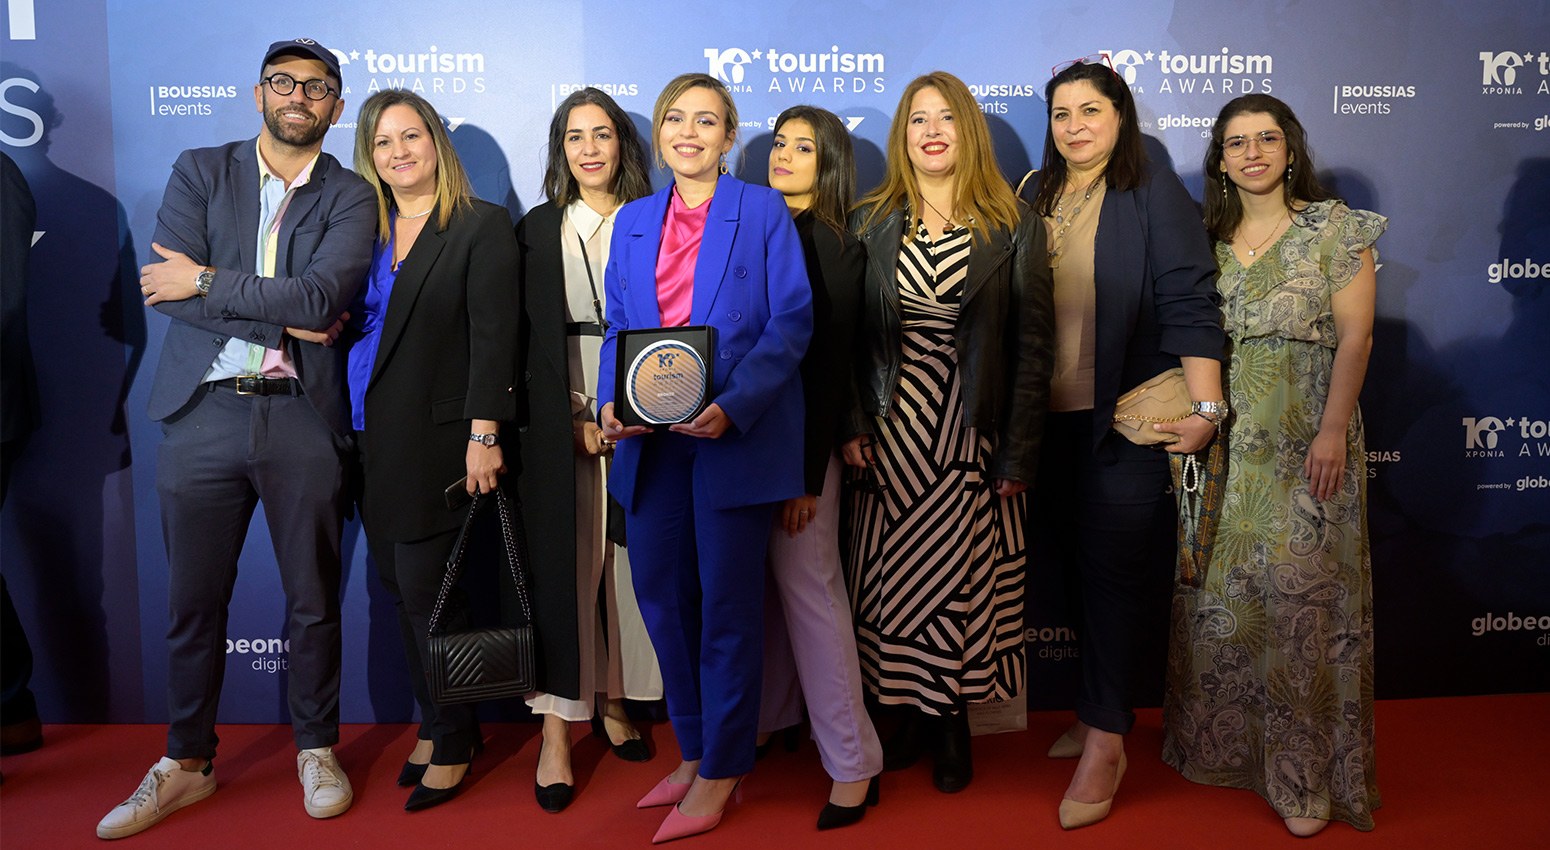 Variety Cruises members awarded in Tourism Awards